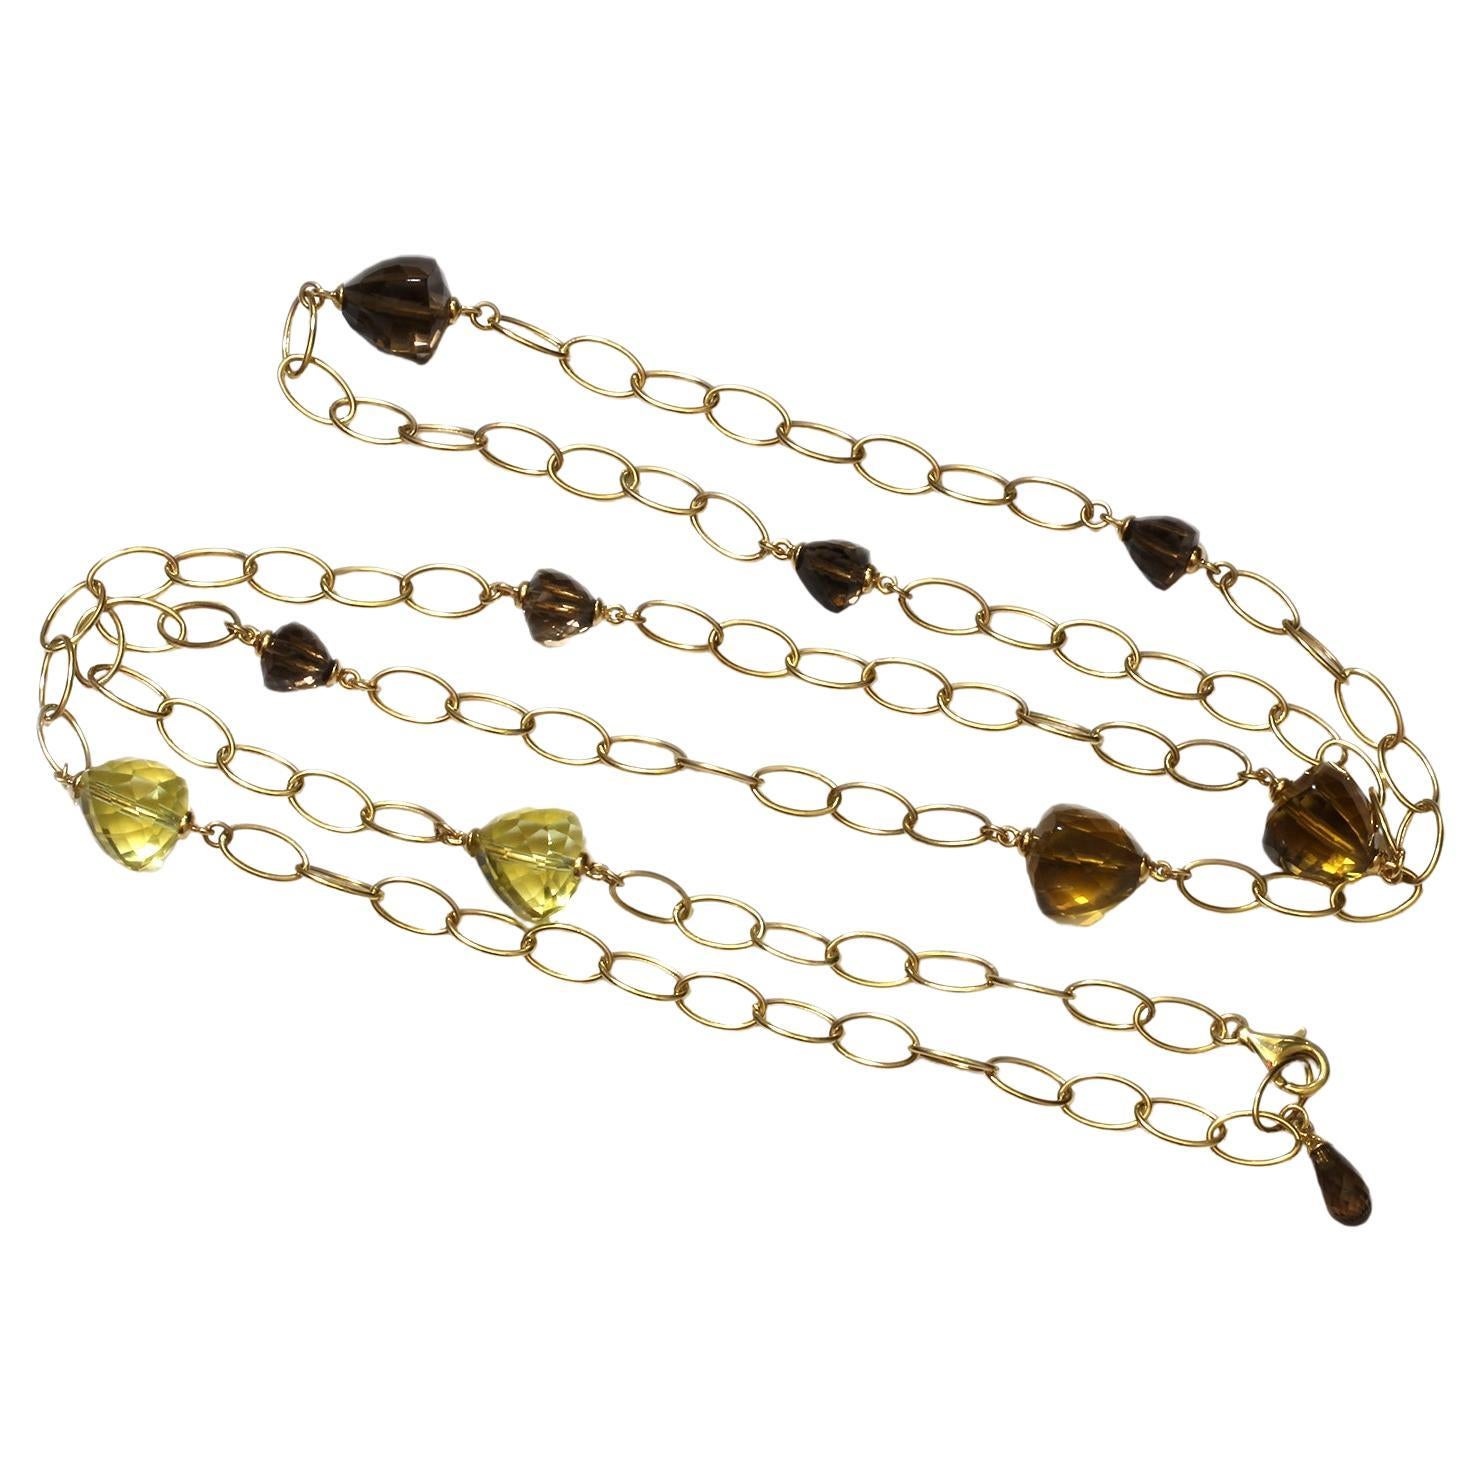 Achieve the coveted chic and layered look with this 14K yellow gold necklace, measuring 42